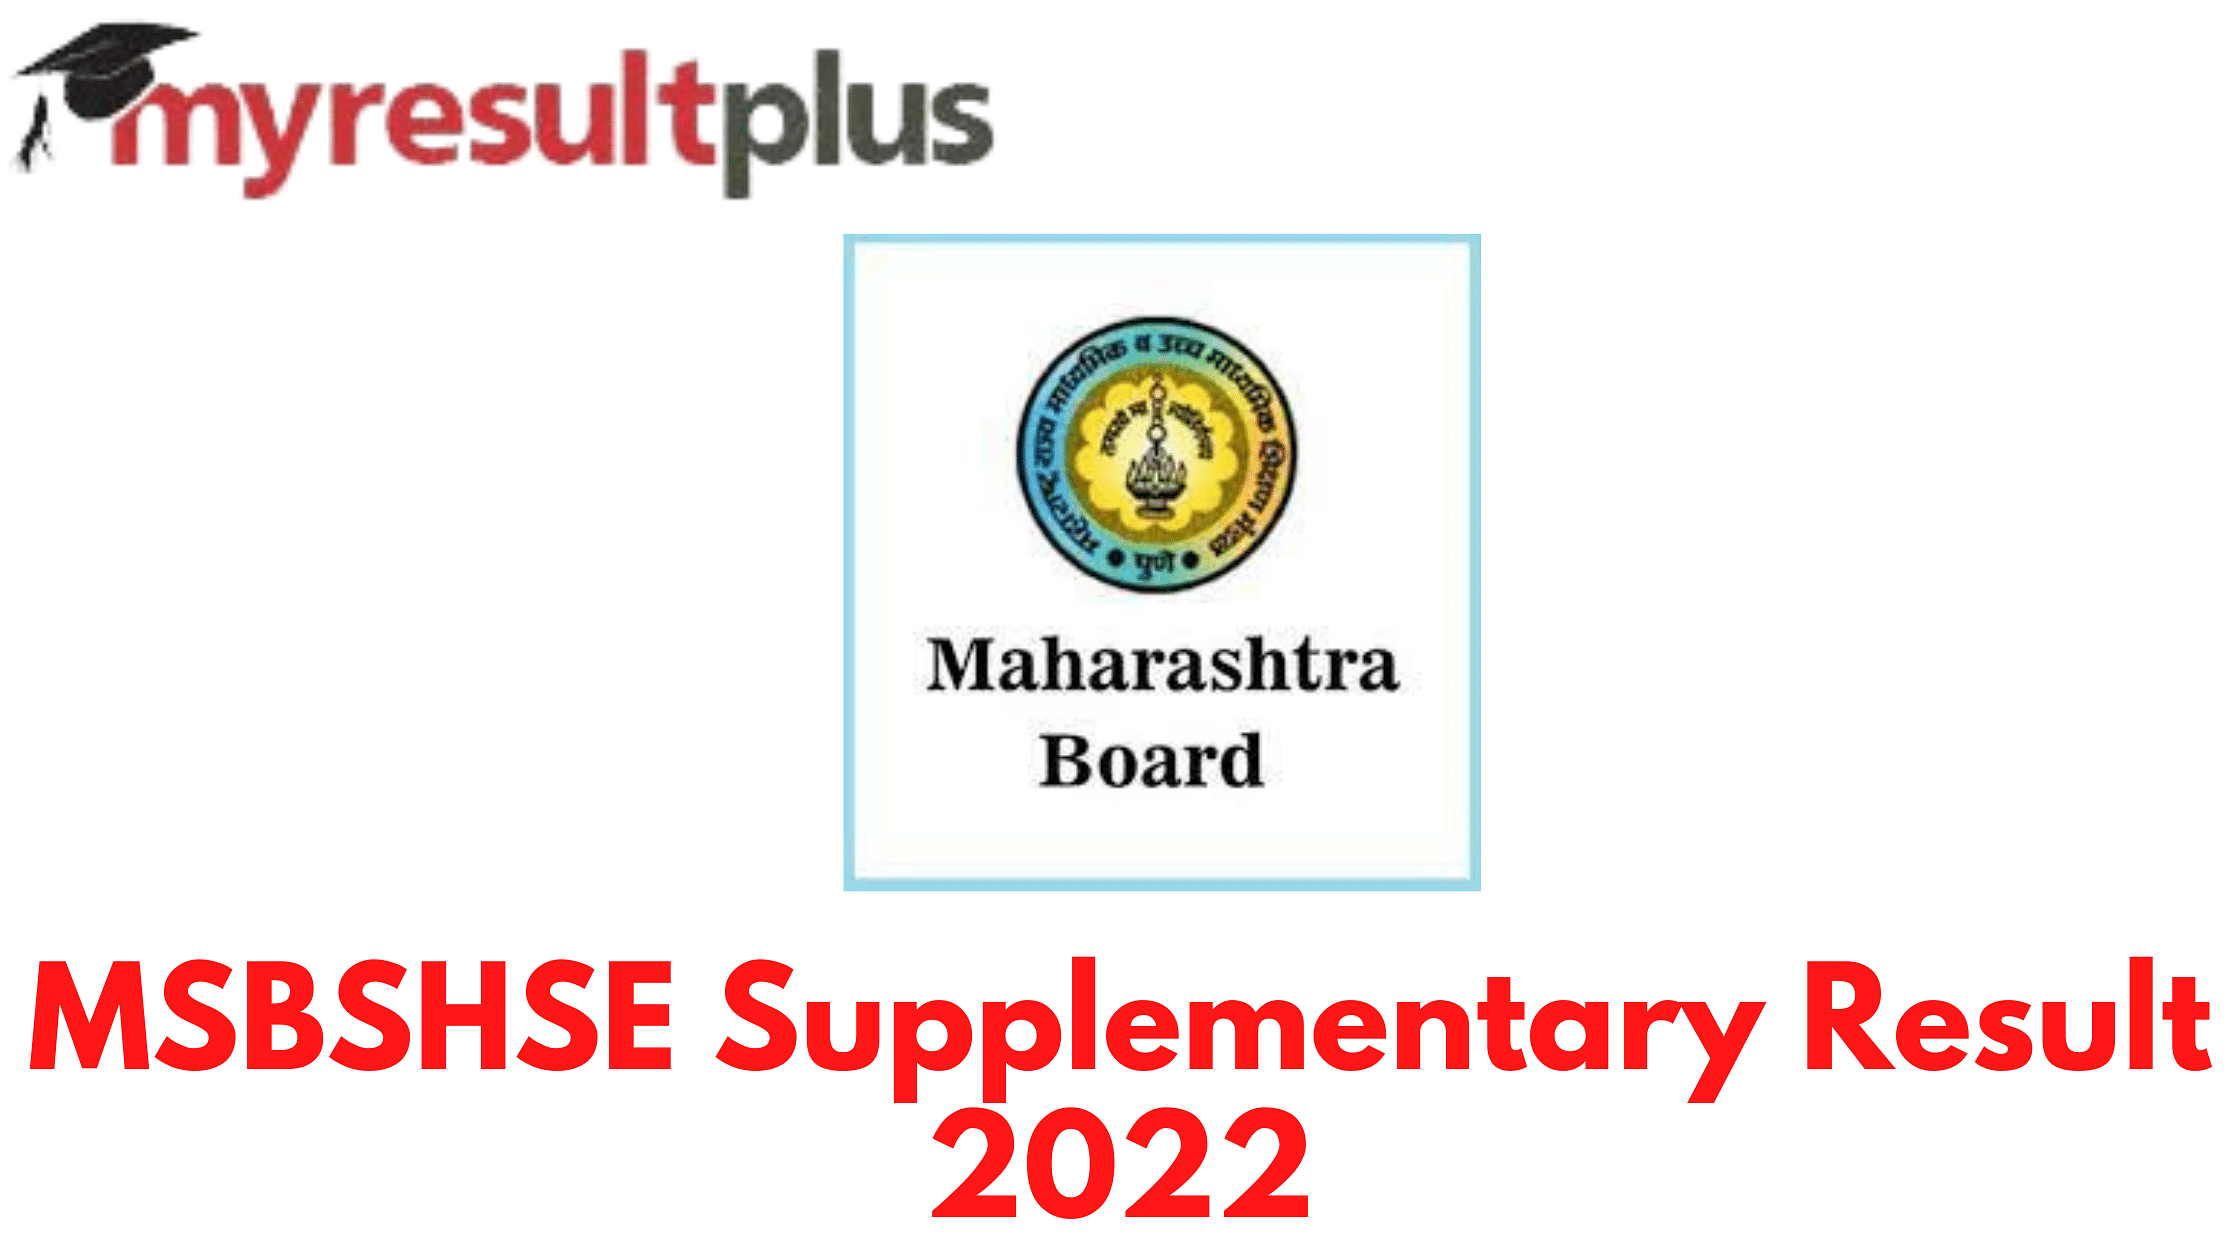 MSBSHSE Supplementary Exam 2022: Results to be Declared Tomorrow, Know How to Check Here